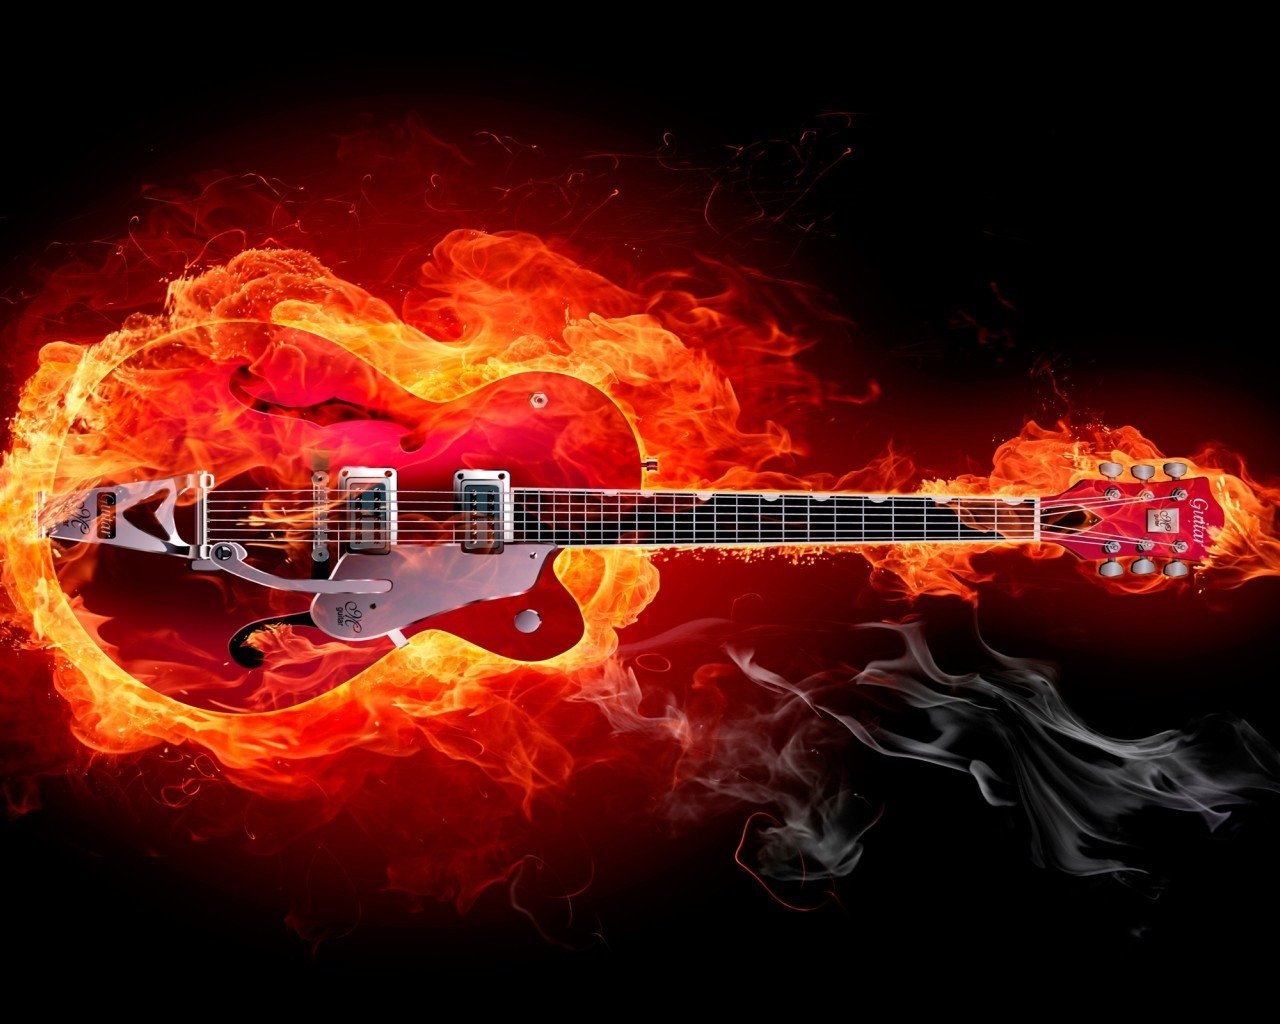 Fire Guitar for 1280 x 1024 resolution